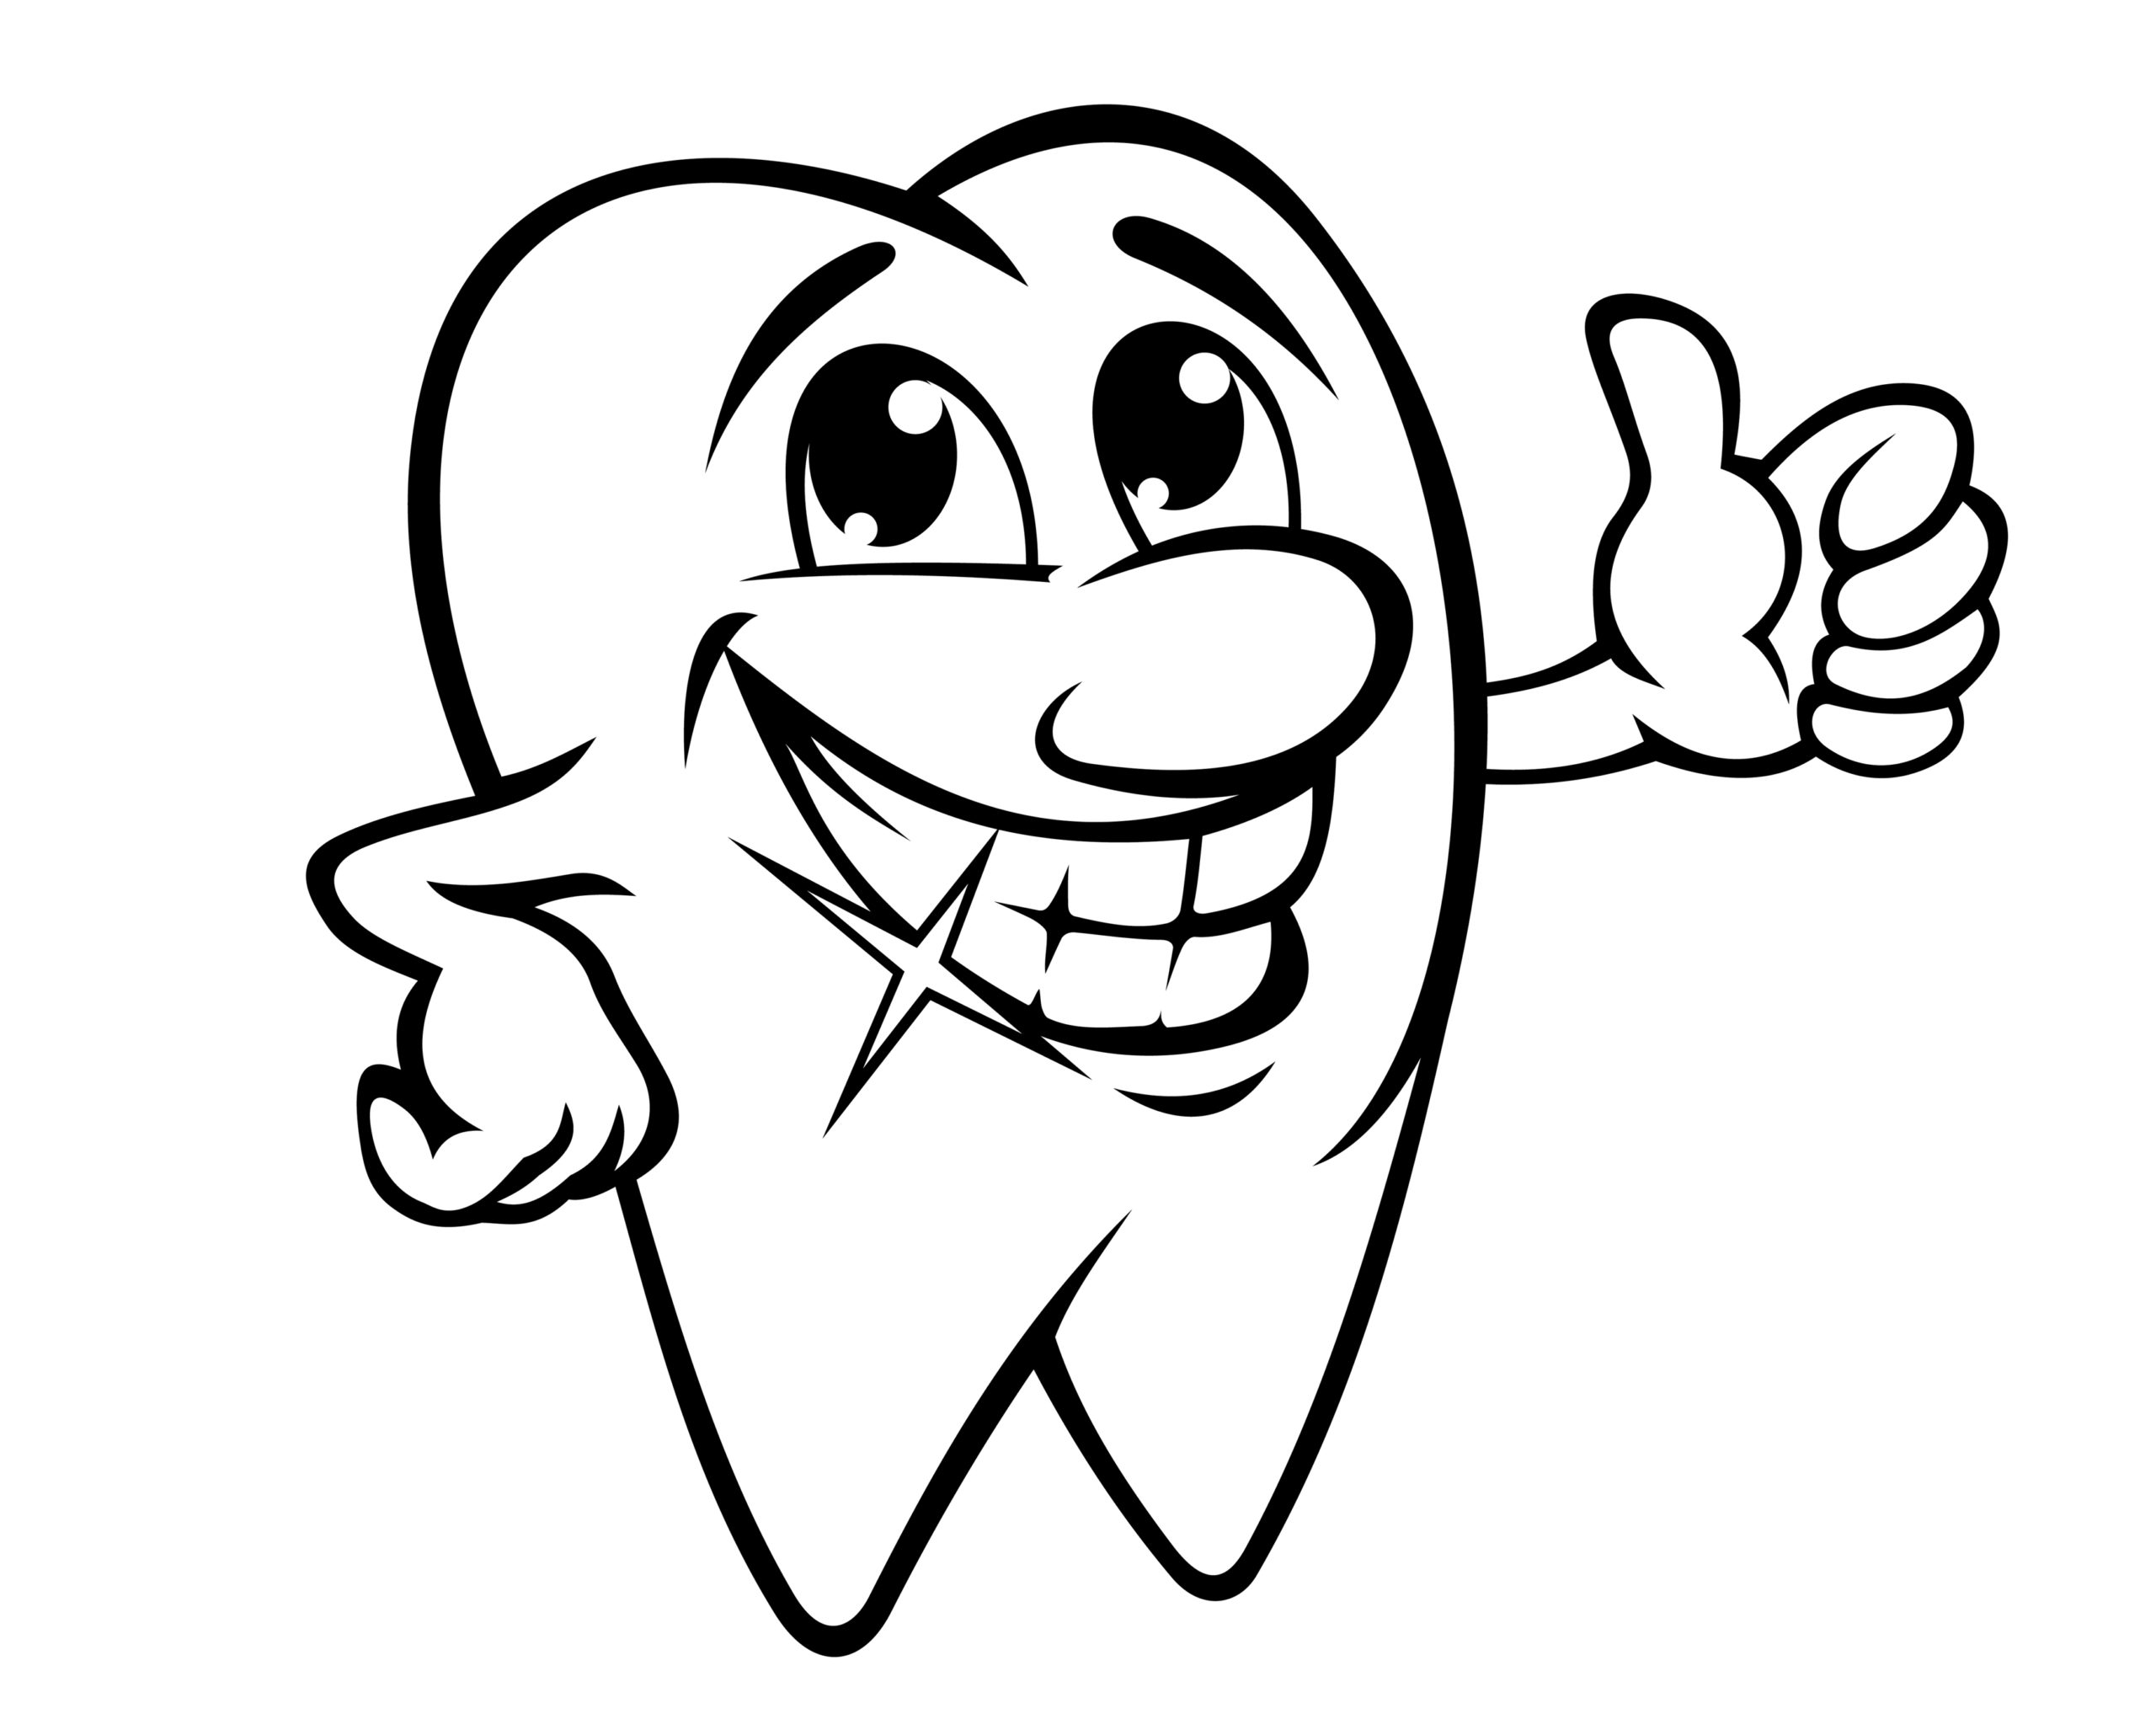 Coloring Pages : Free Bright Teeth Clip Art Dental Health Coloring 